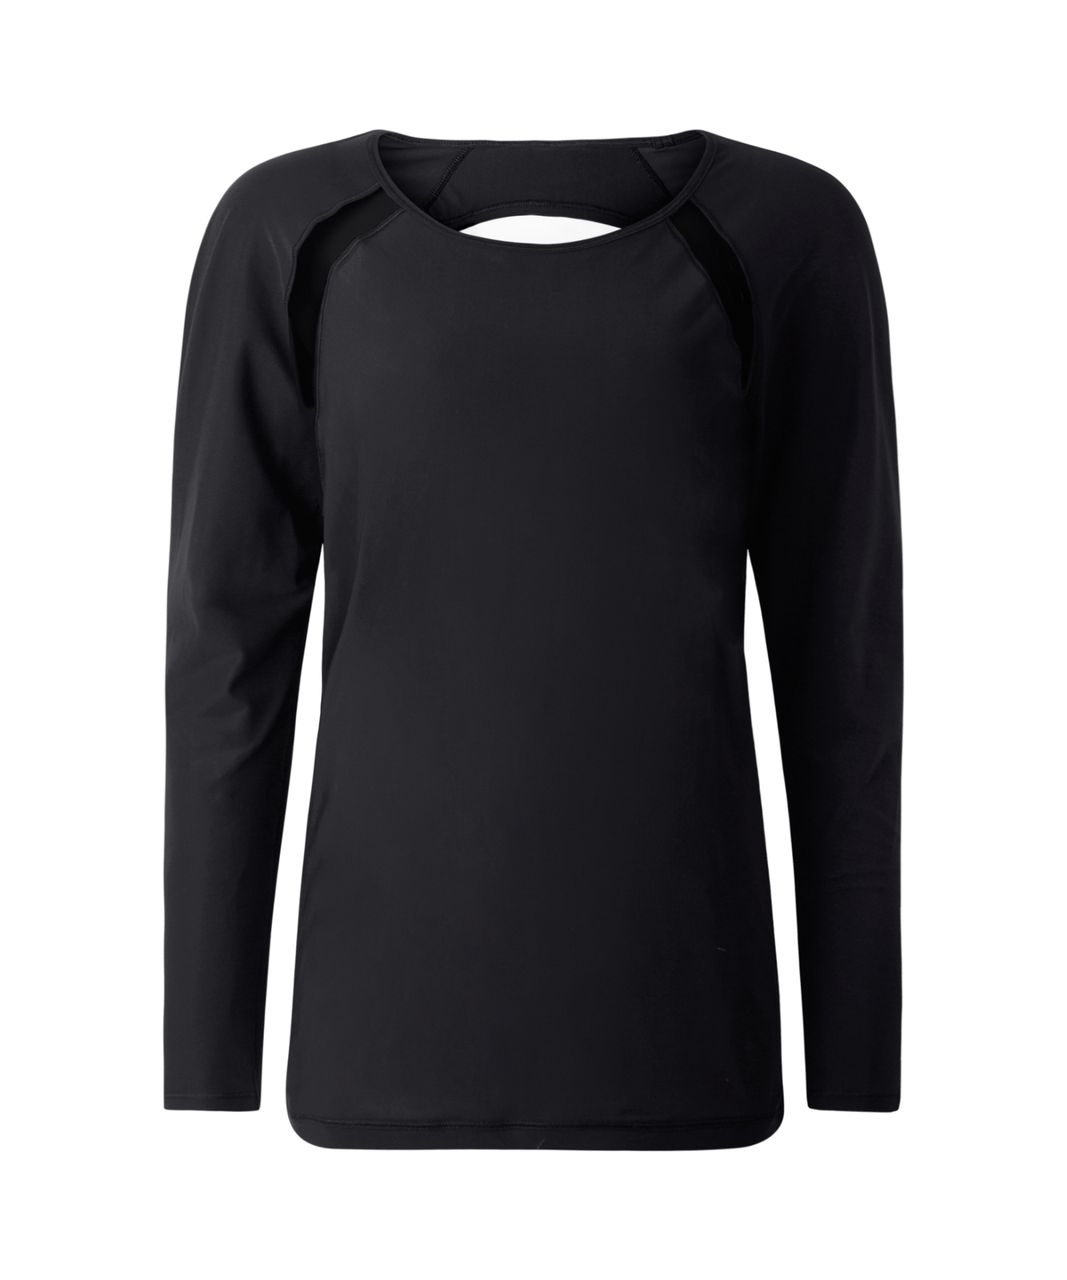 Lucky Brand Ladies Long Sleeve Tee, 2-pack (Black and white, M